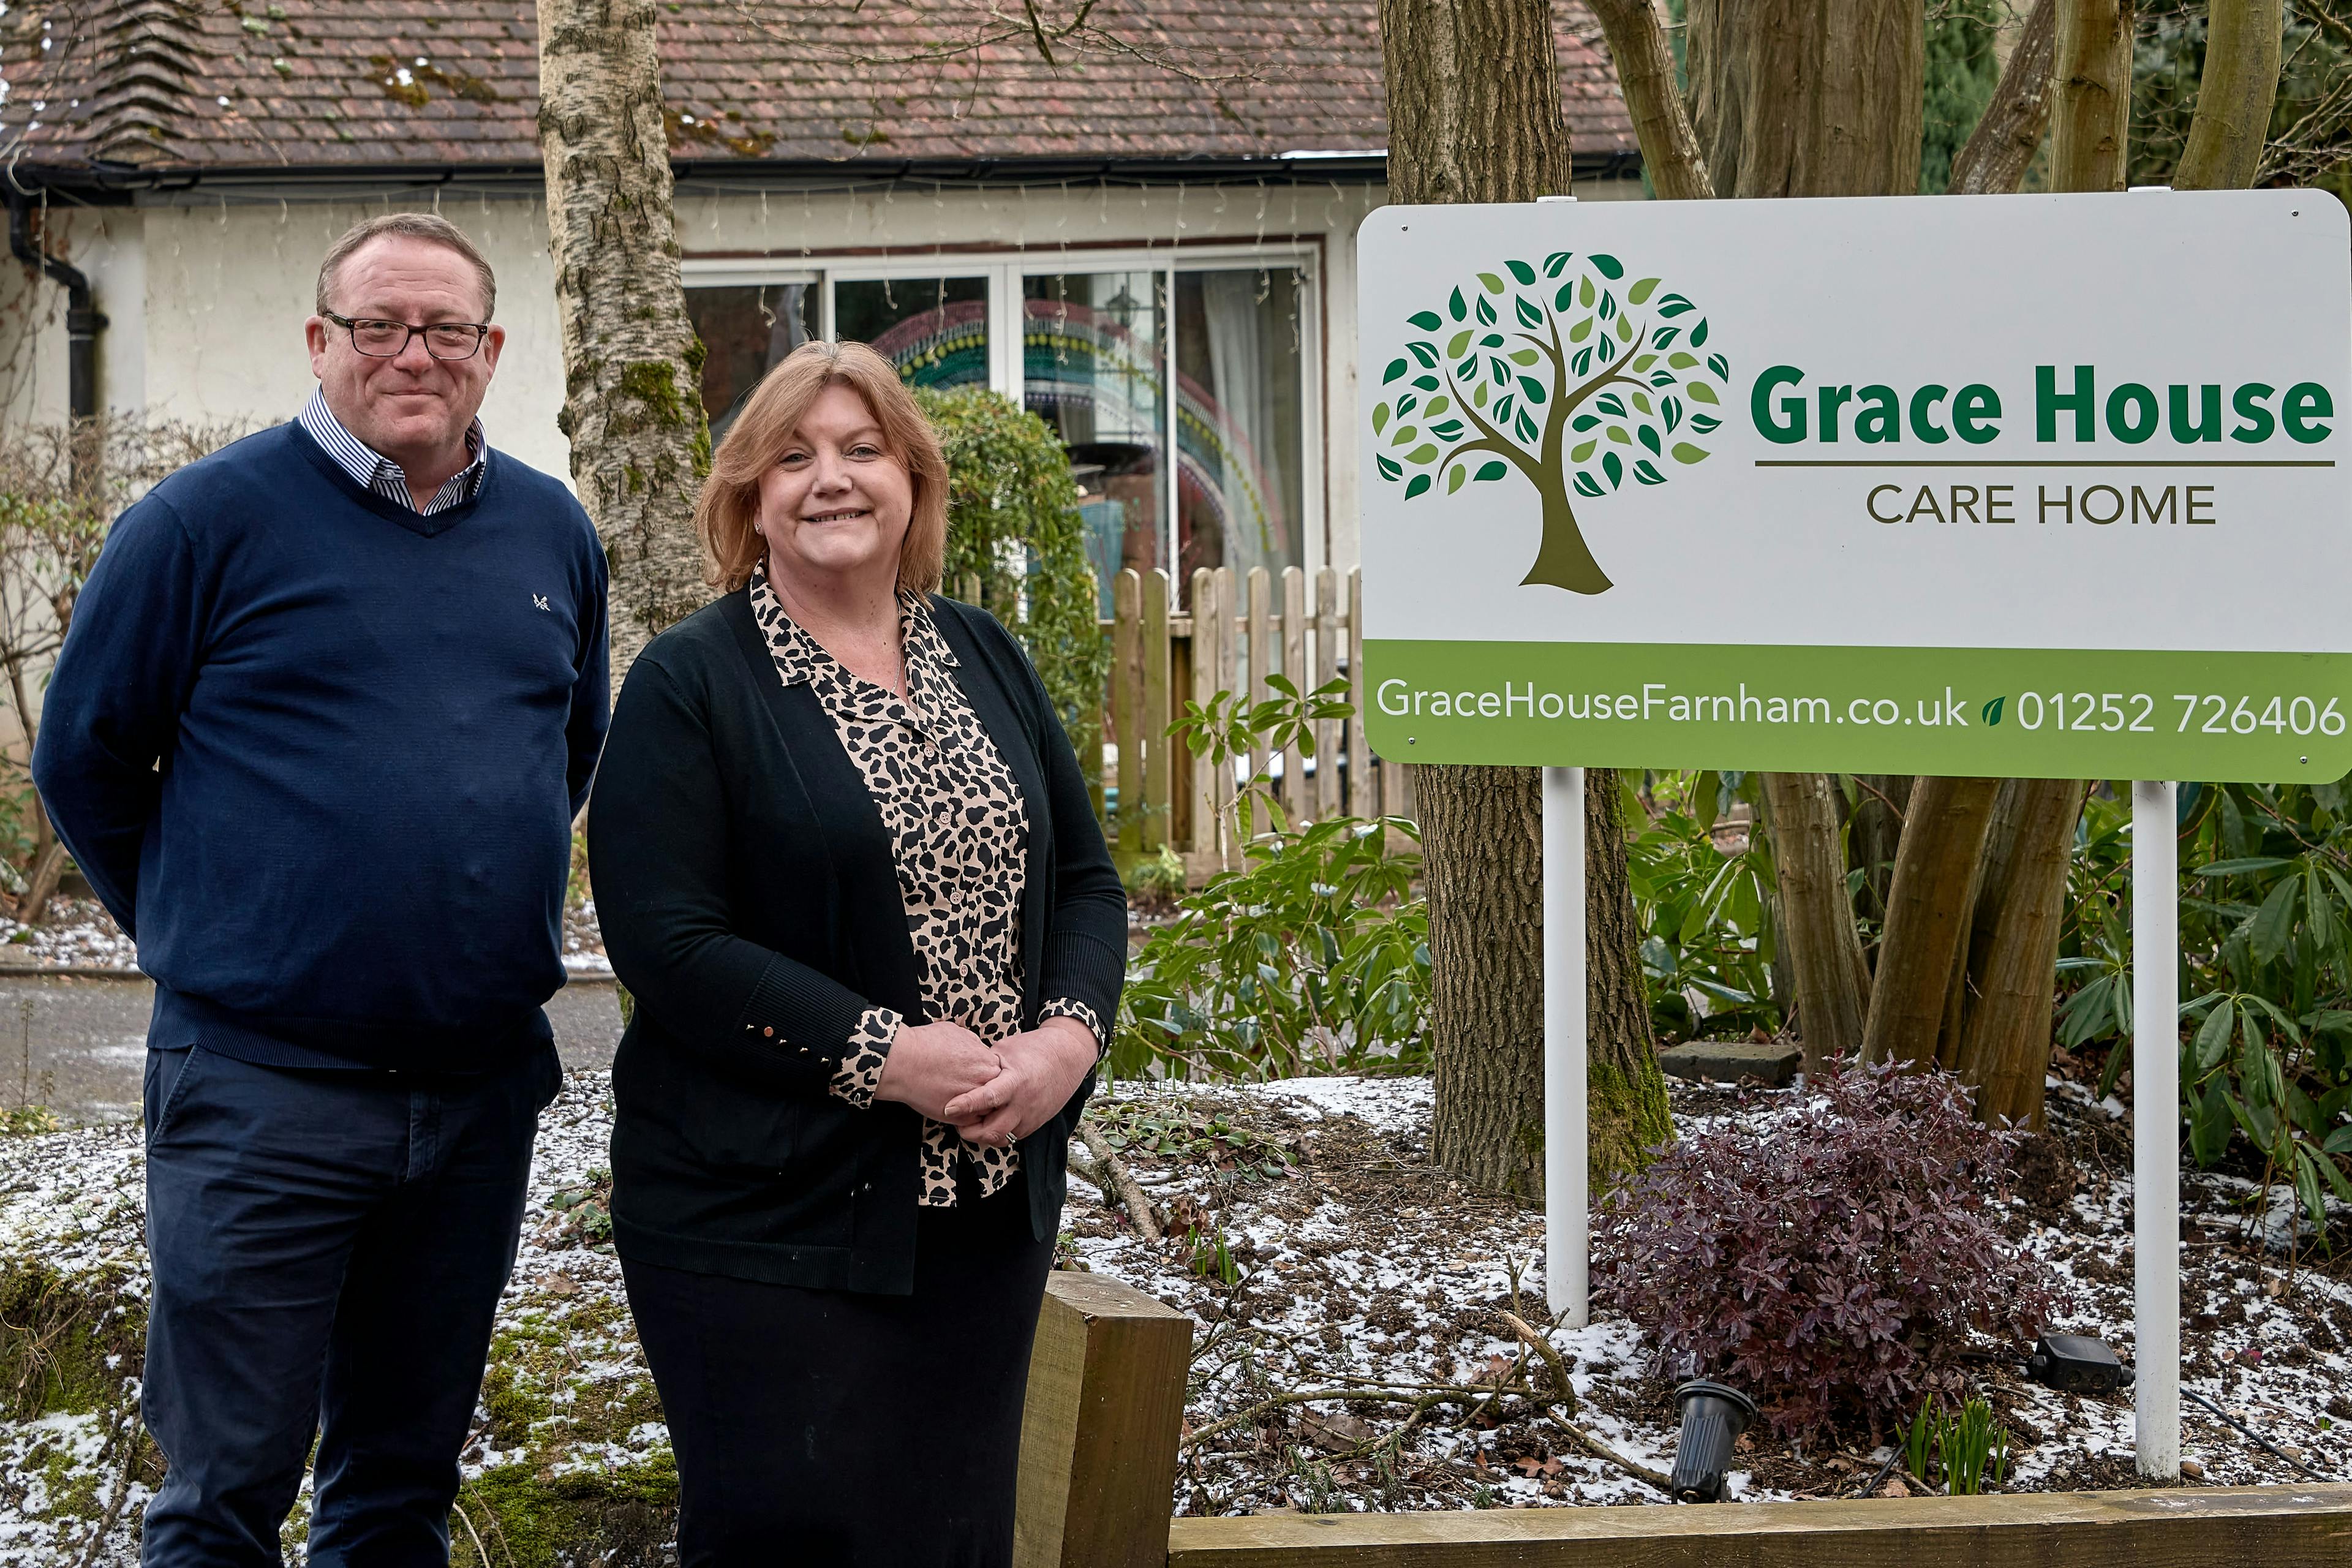 Independent Care Home - Grace House care home 7